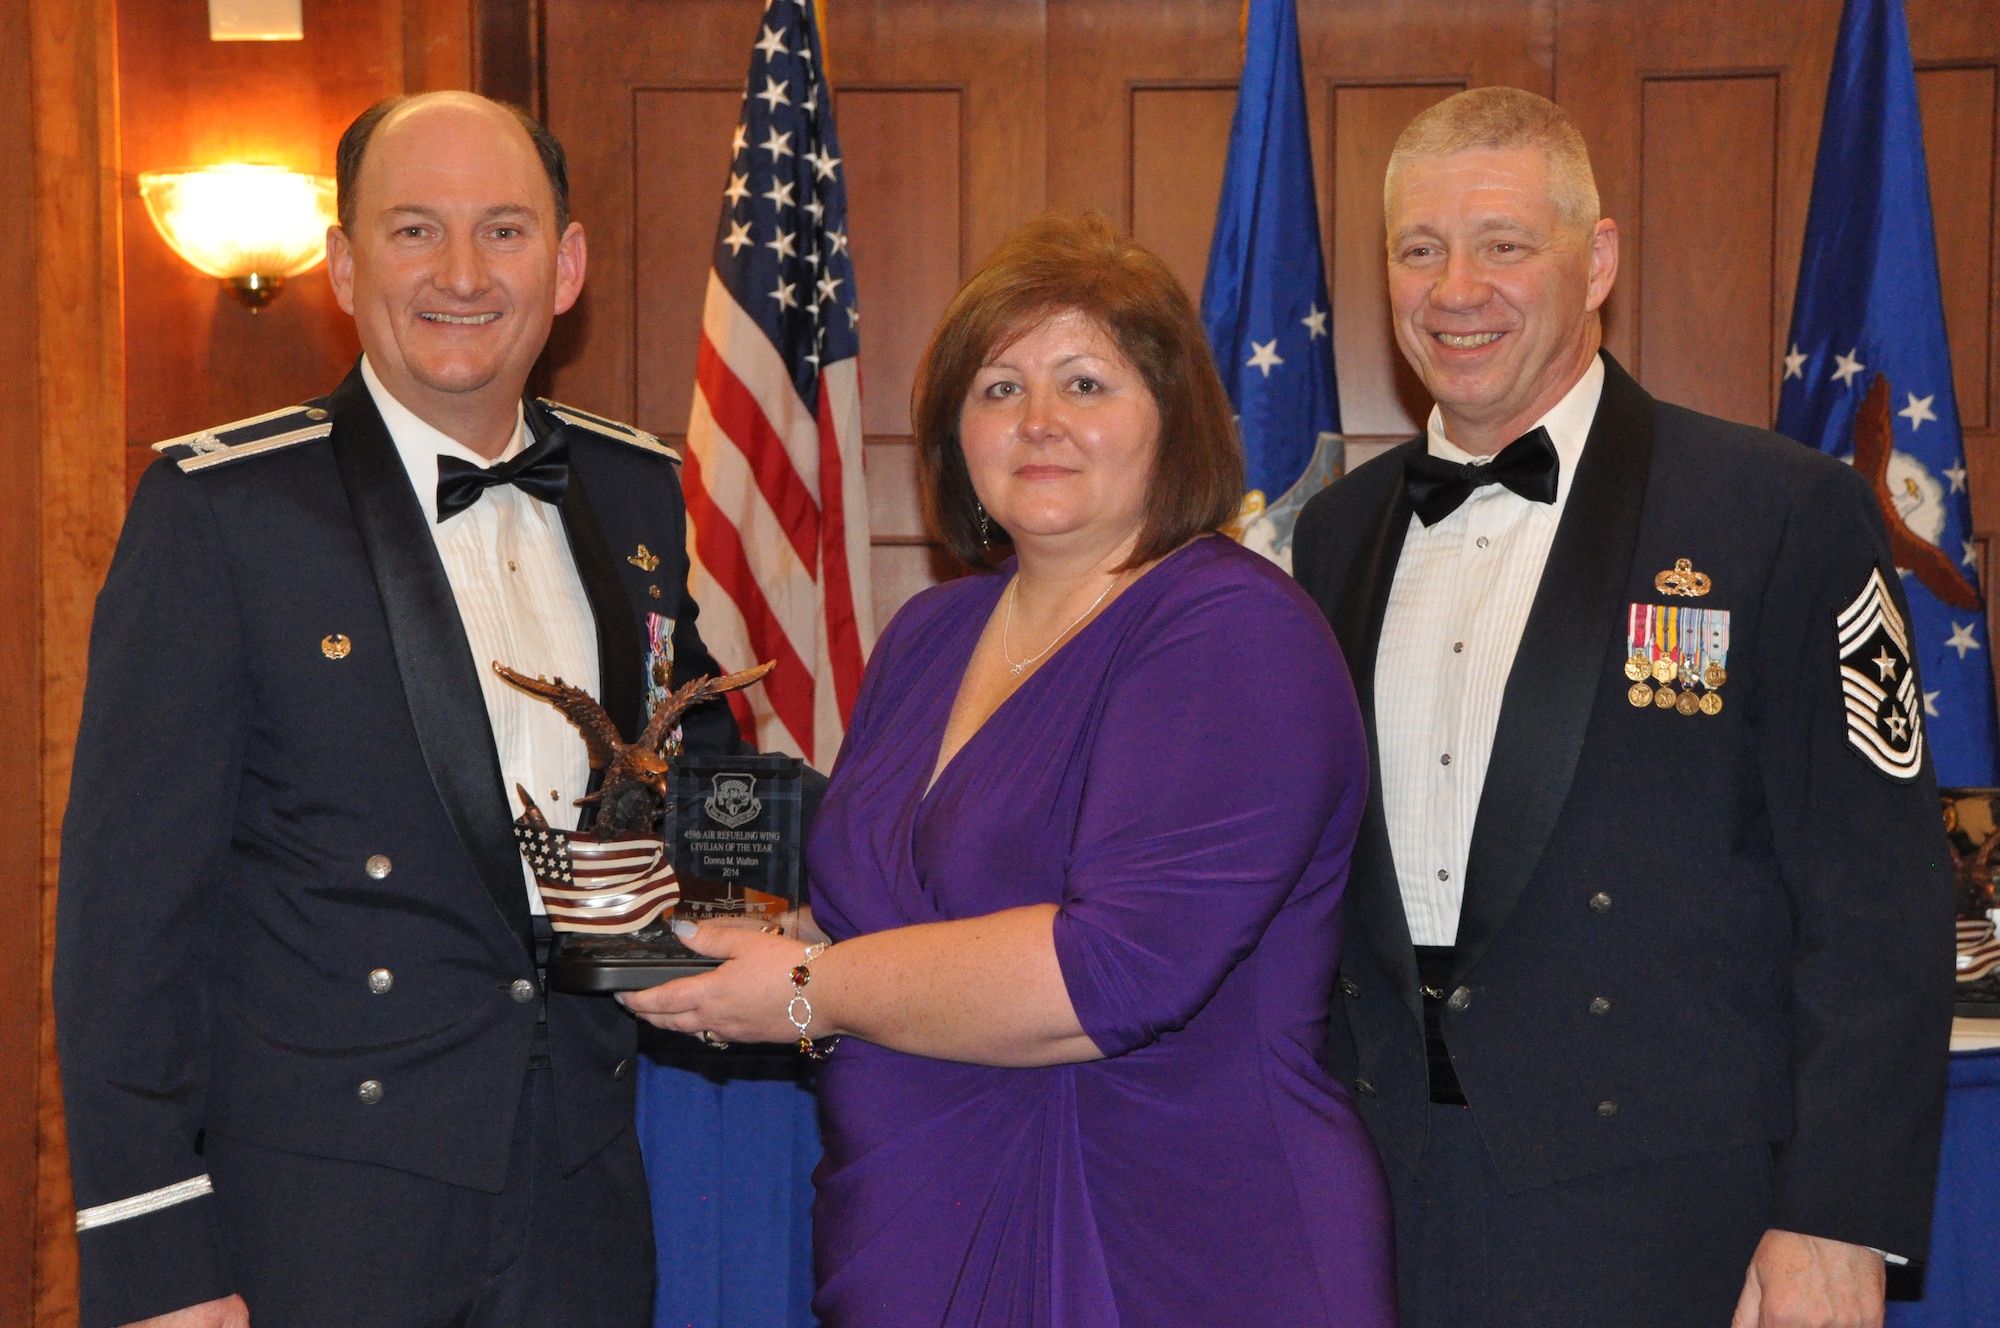 Ms. Donna Walton, 756th Air Refueling Squadron, wins the Civilian of the Year award at the 459 ARW Annual Awards Banquet on Saturday, March 7, 2015. (Air Force Photo / SrA Kristin Kurtz)